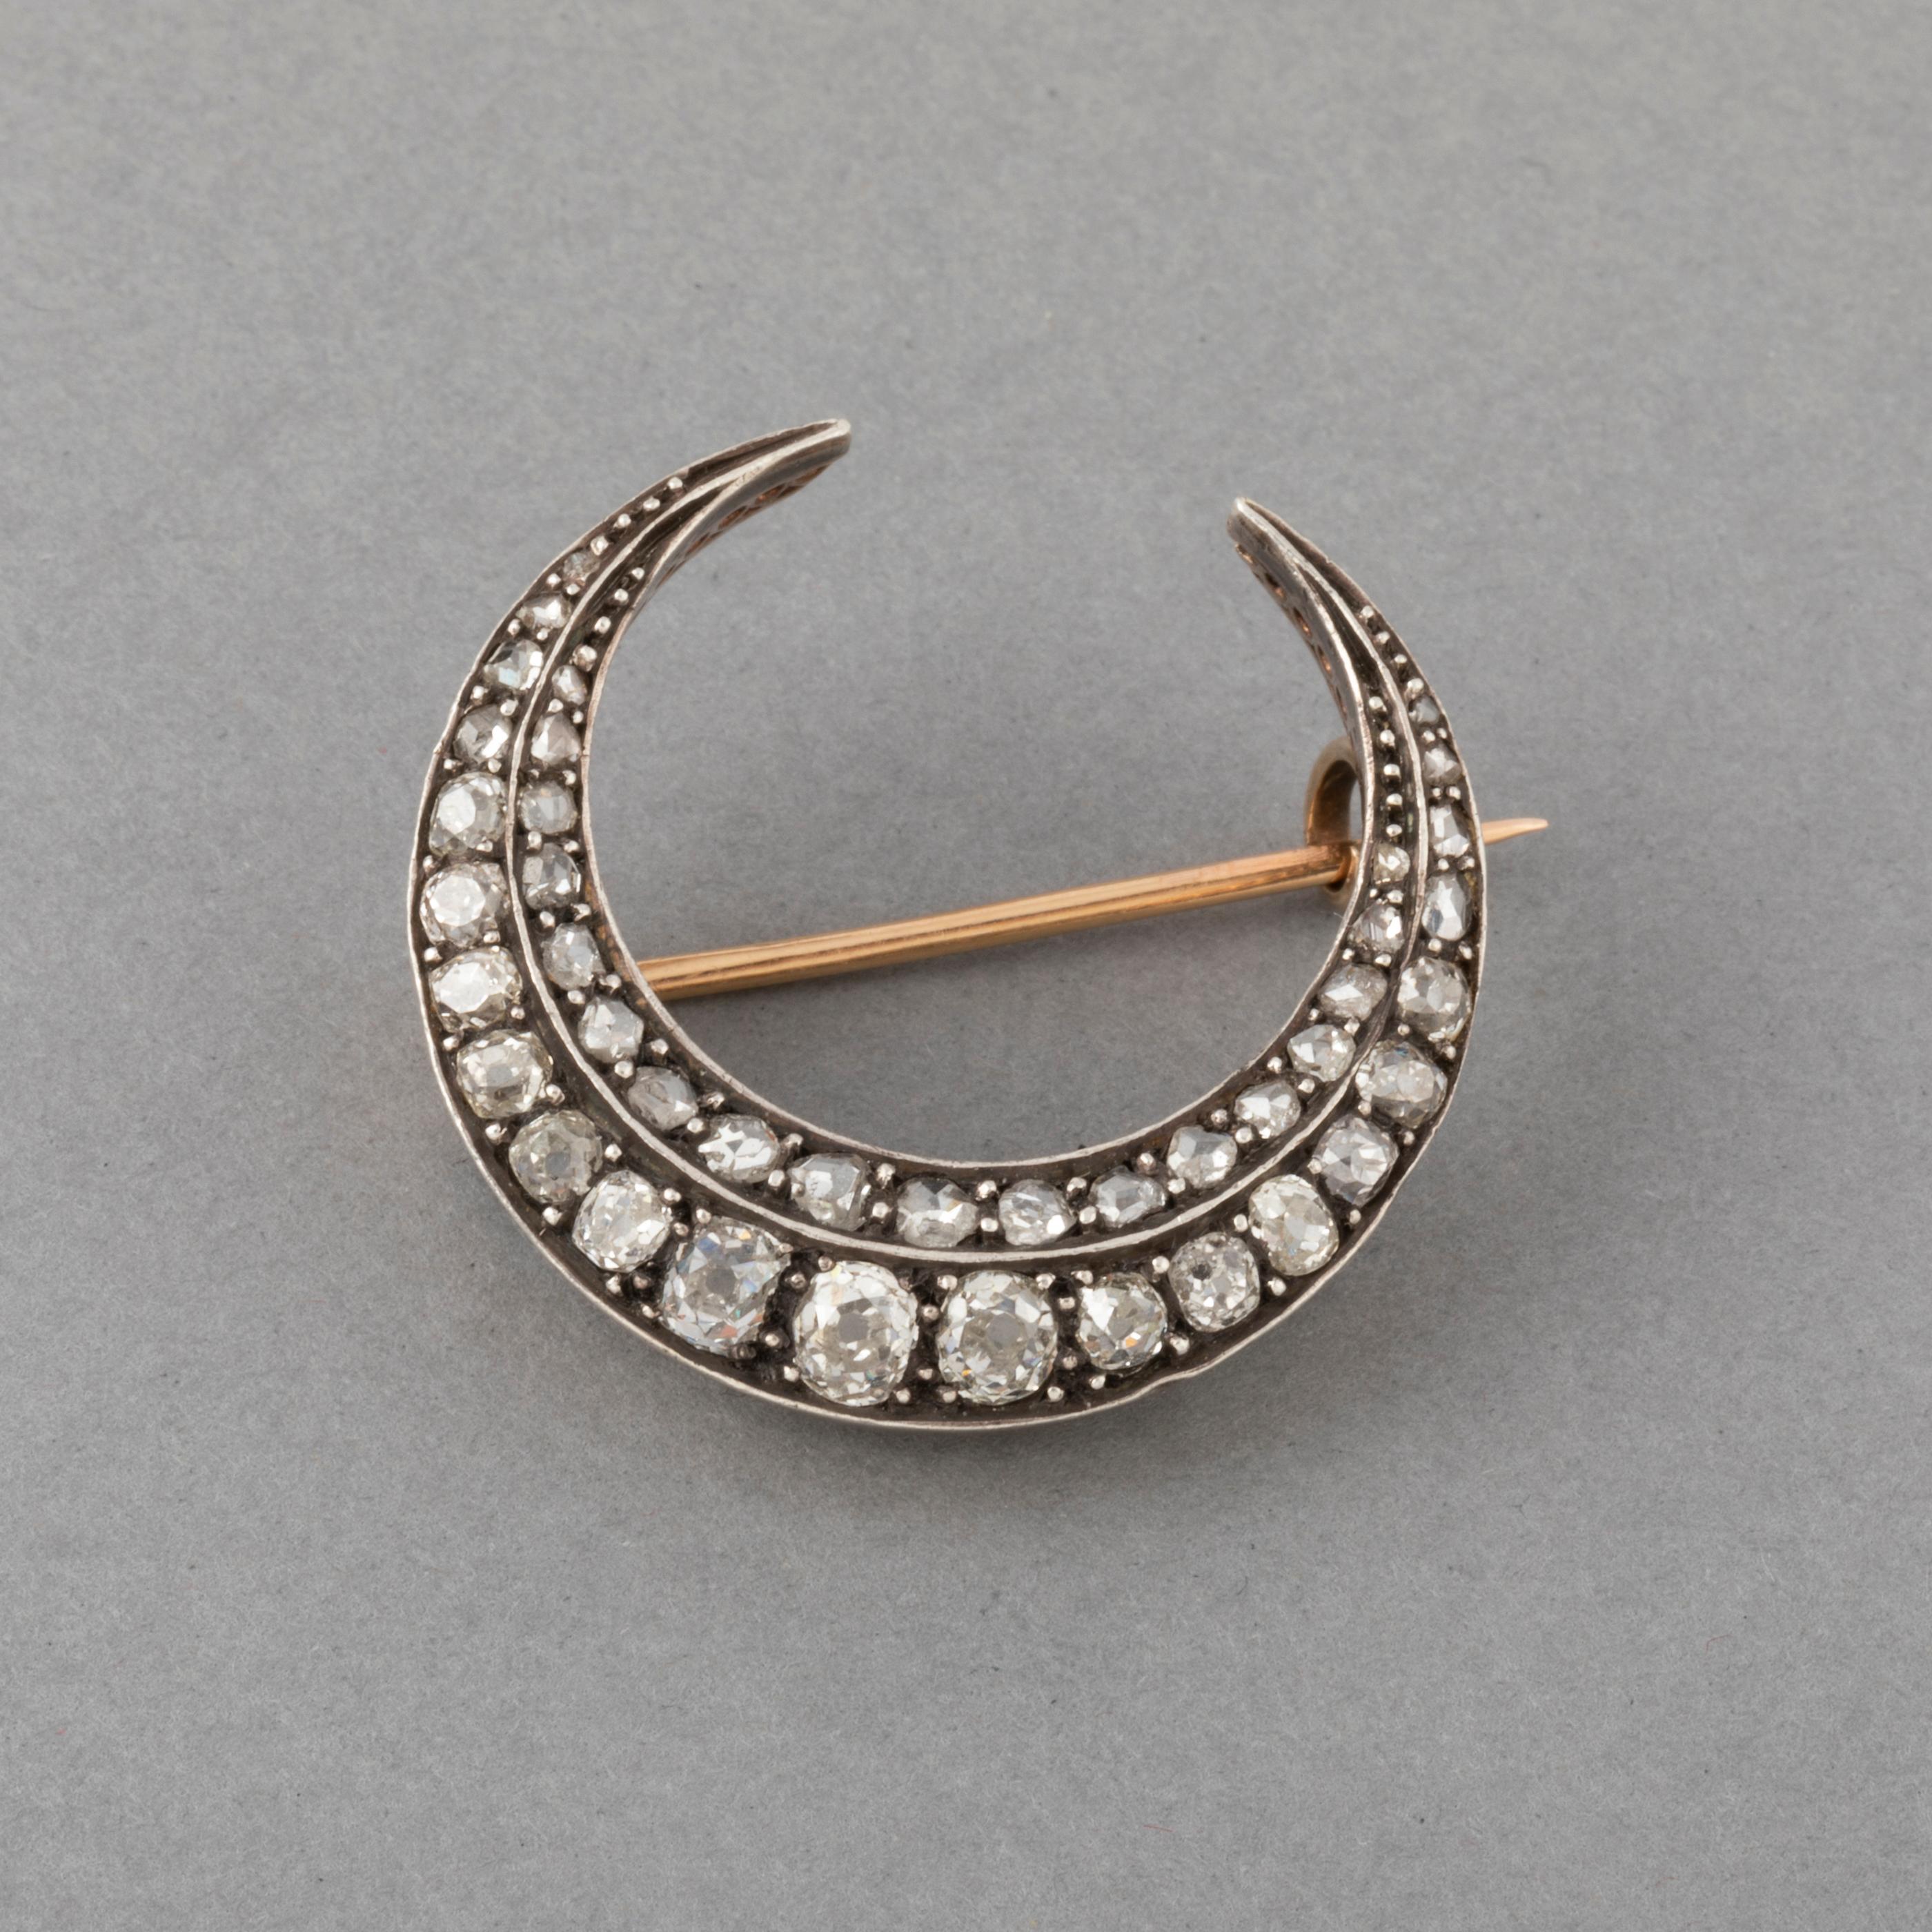 2 Carats Diamonds Antique French Crescent Brooch

Beautiful antique Crescent, made in France circa 1890.
Made in rose gold 18k and silver. Mark gold:  the owl. Mark for silver: the swan.
The diamonds weights 2 carats at least. Old European cut and